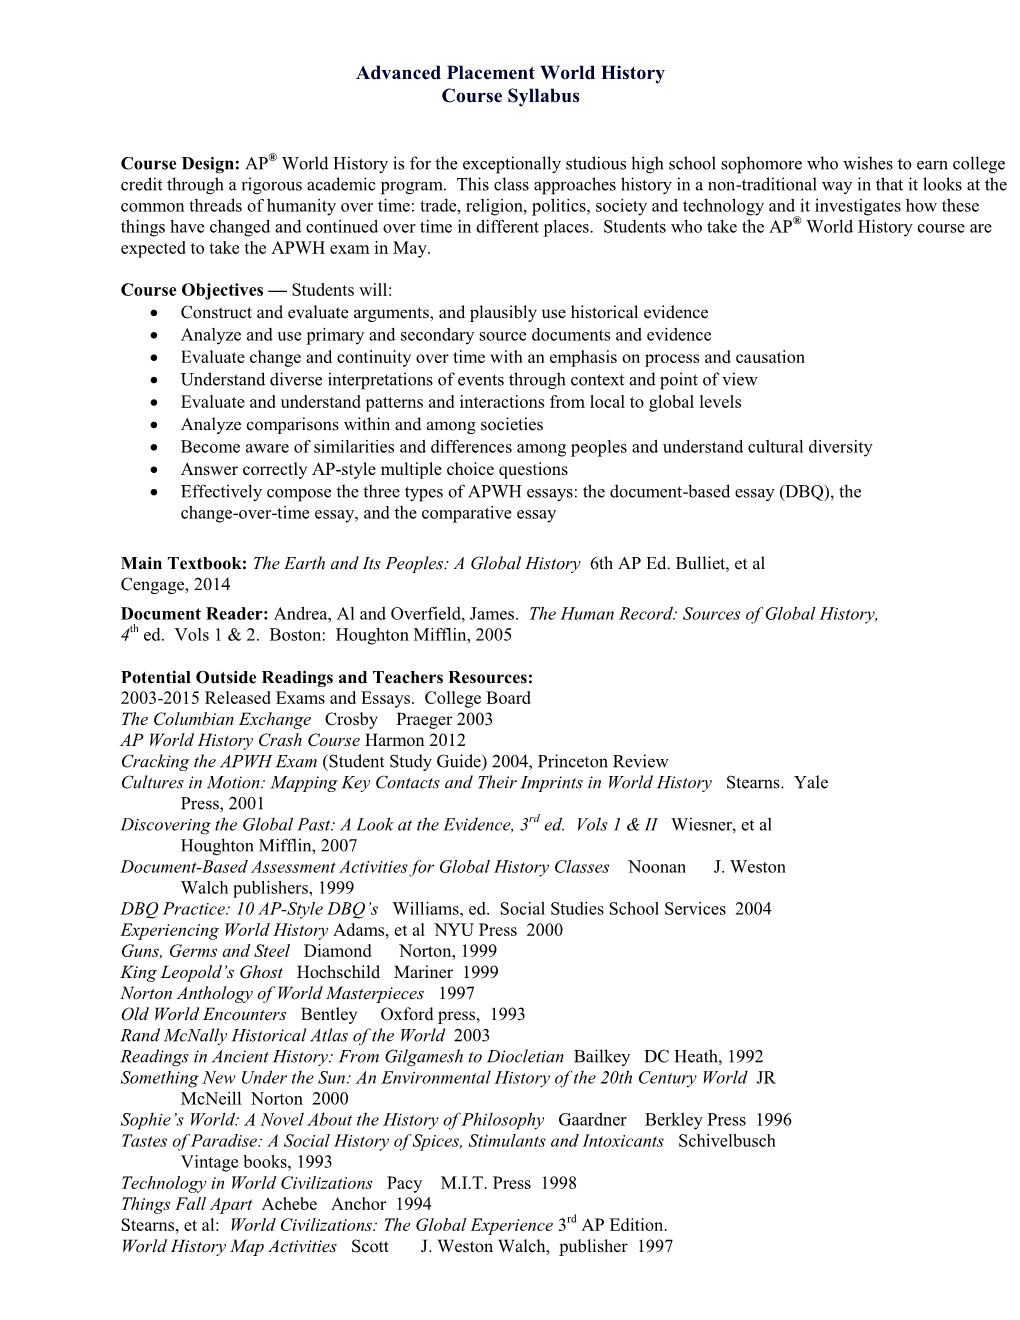 Advanced Placement World History Course Syllabus